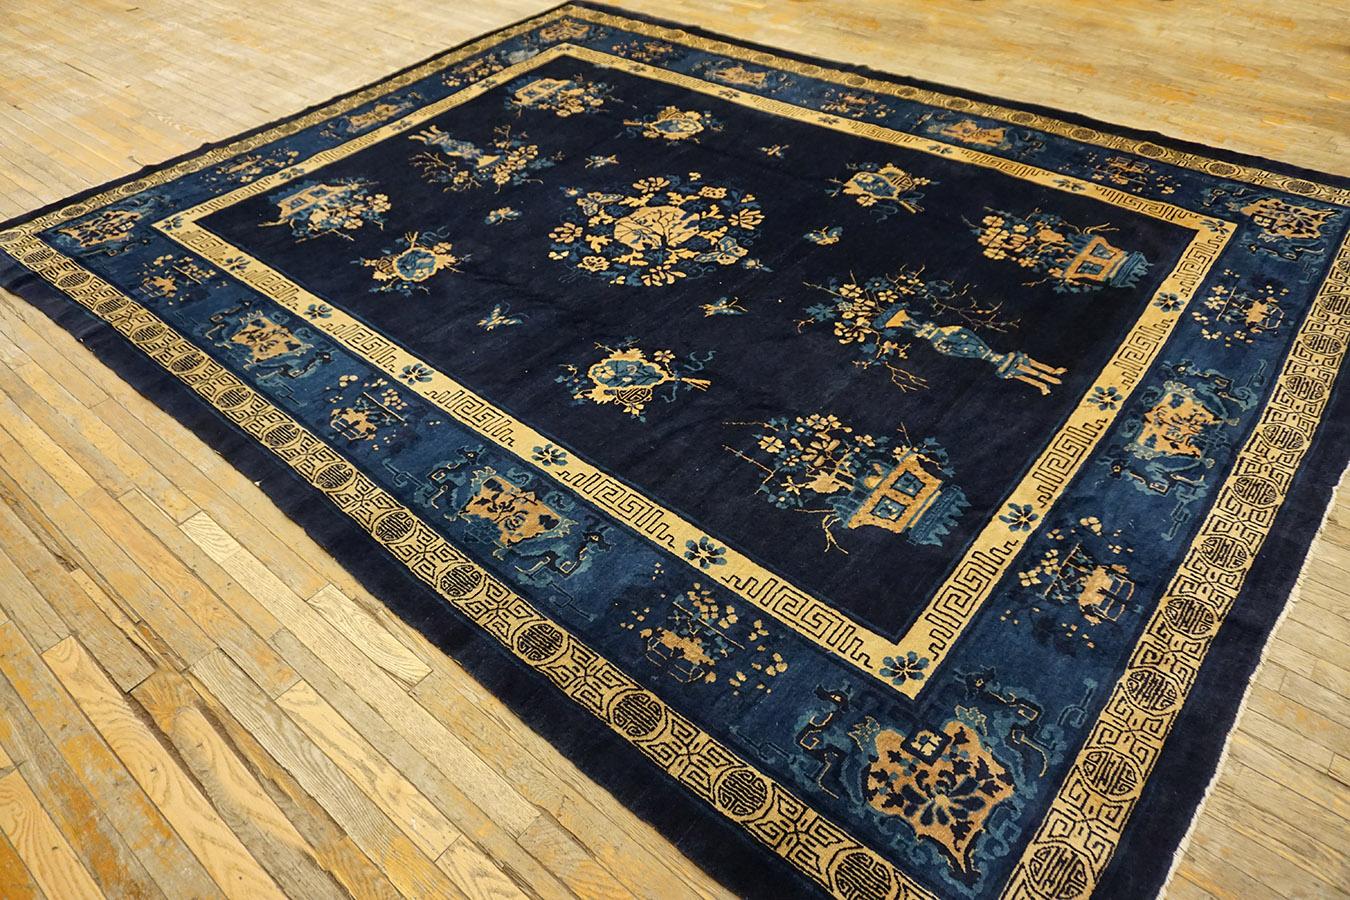 Early 20th Century Chinese Perking Carpet ( 9' x 11'8'' - 275 x 355 ) In Good Condition For Sale In New York, NY